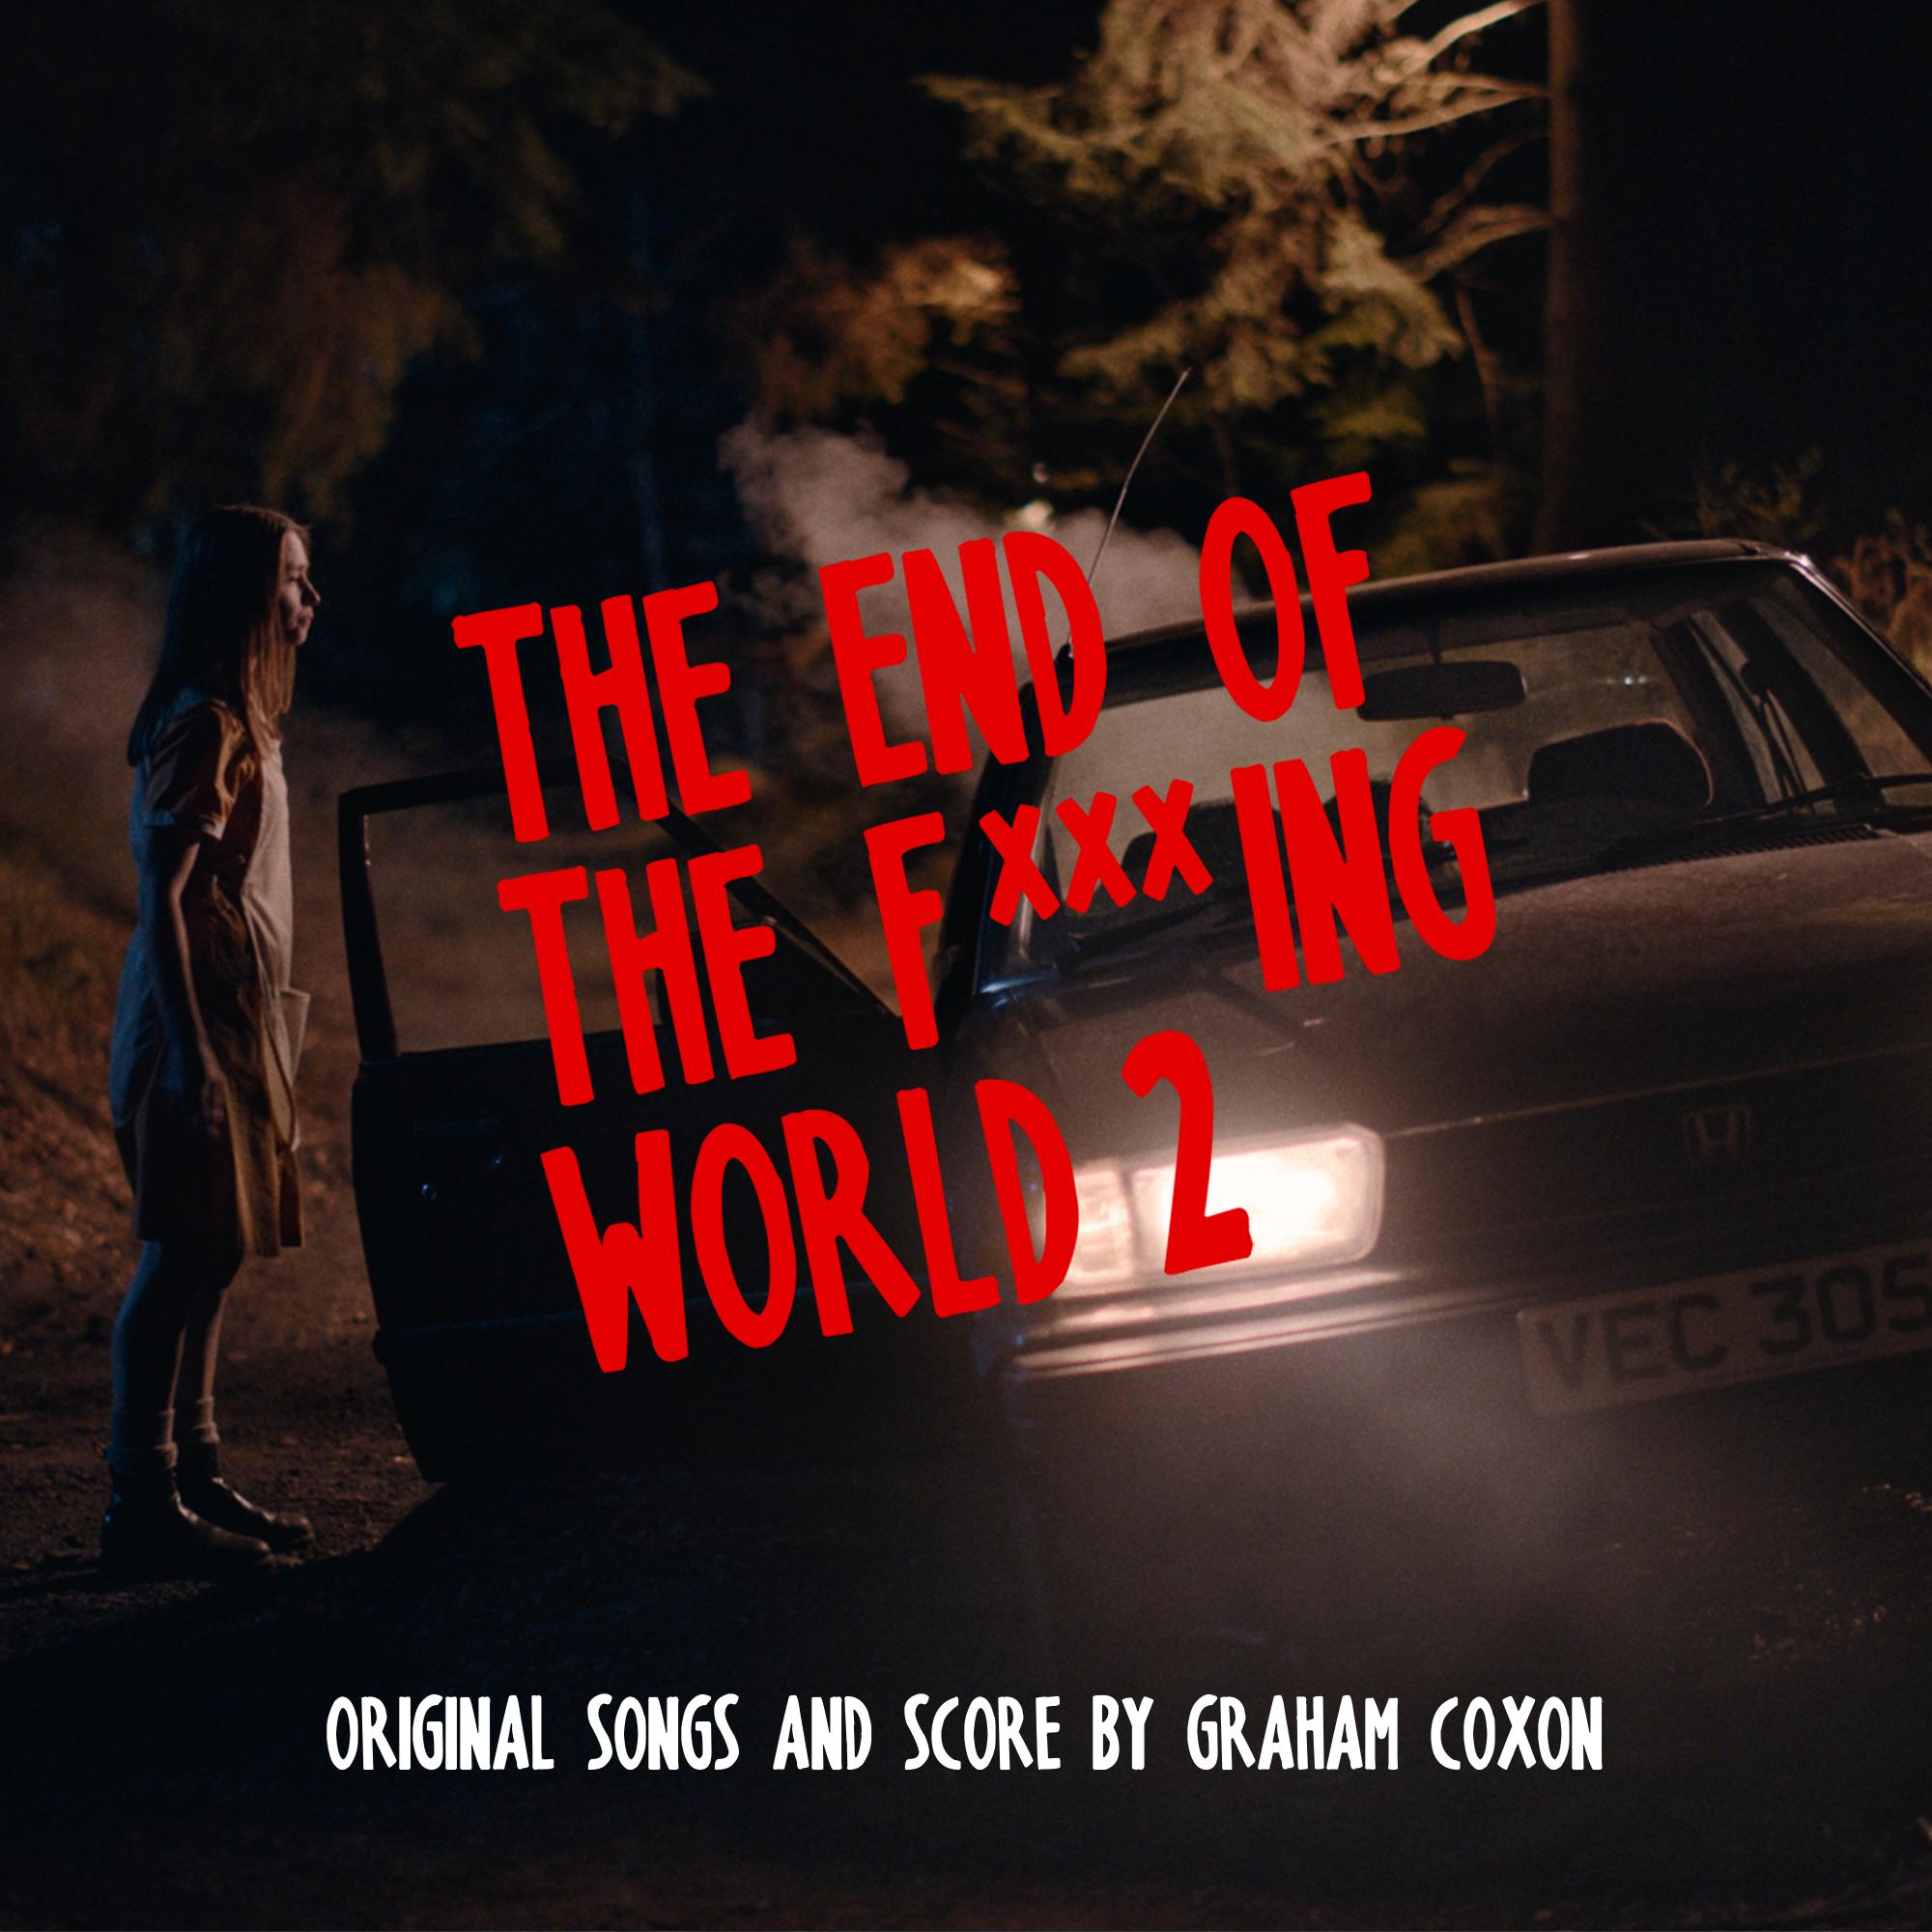 I'll Race You Home歌词 歌手Graham Coxon-专辑The End of The F***ing World 2 (Original Songs and Score)-单曲《I'll Race You Home》LRC歌词下载